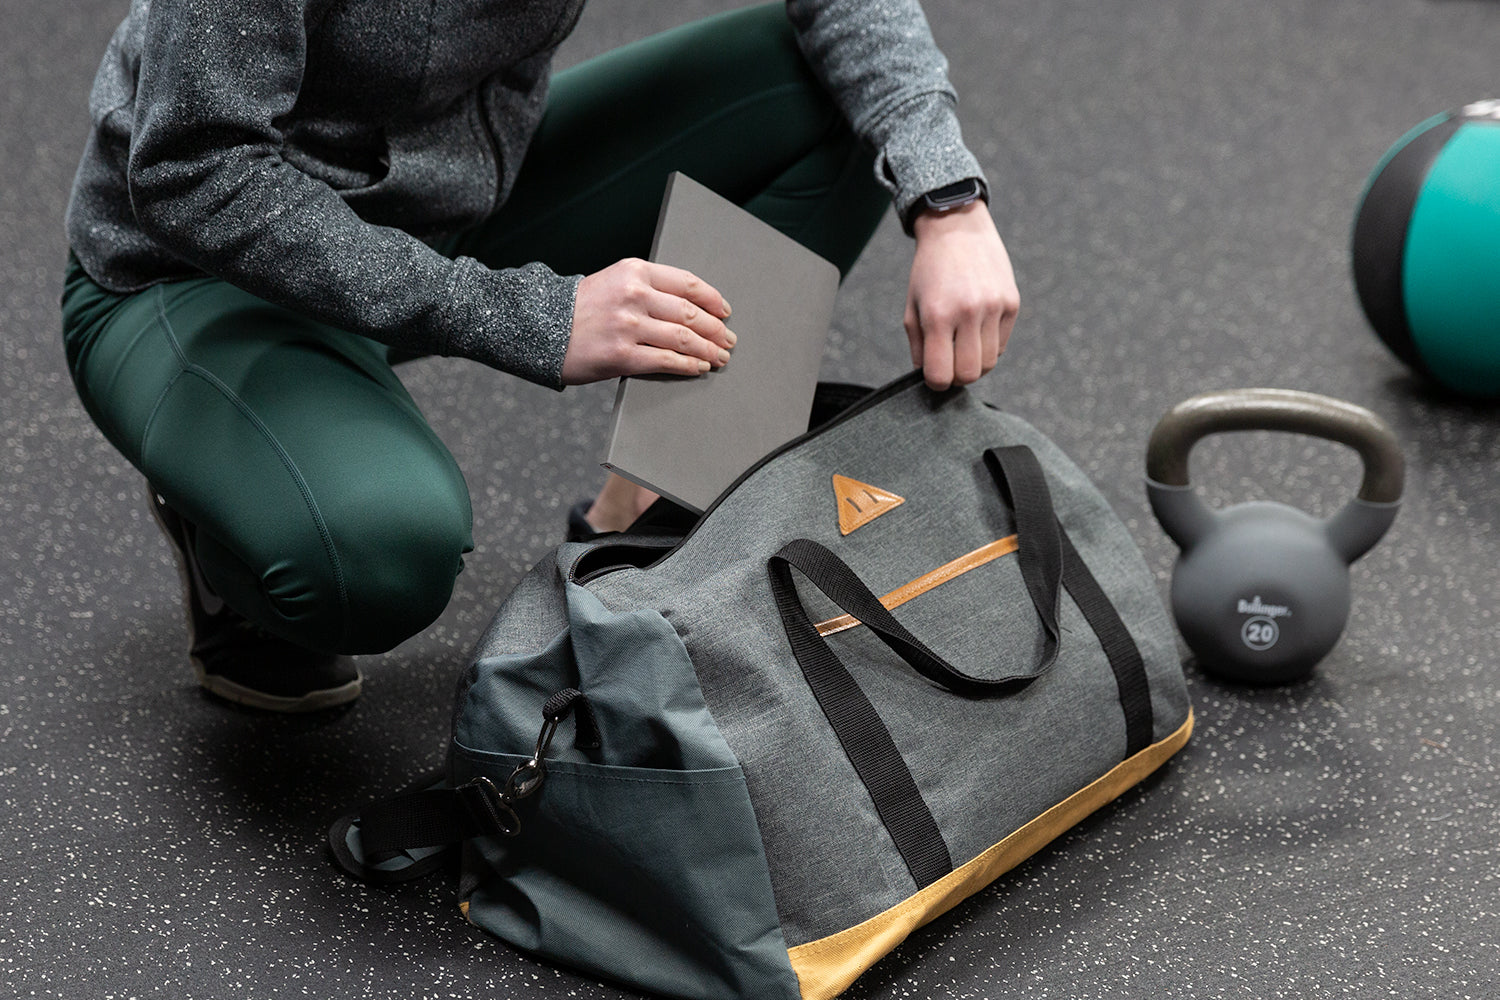 A woman in grey and green fitness gear in a gym bends down to put a fitness journal in a black bag.